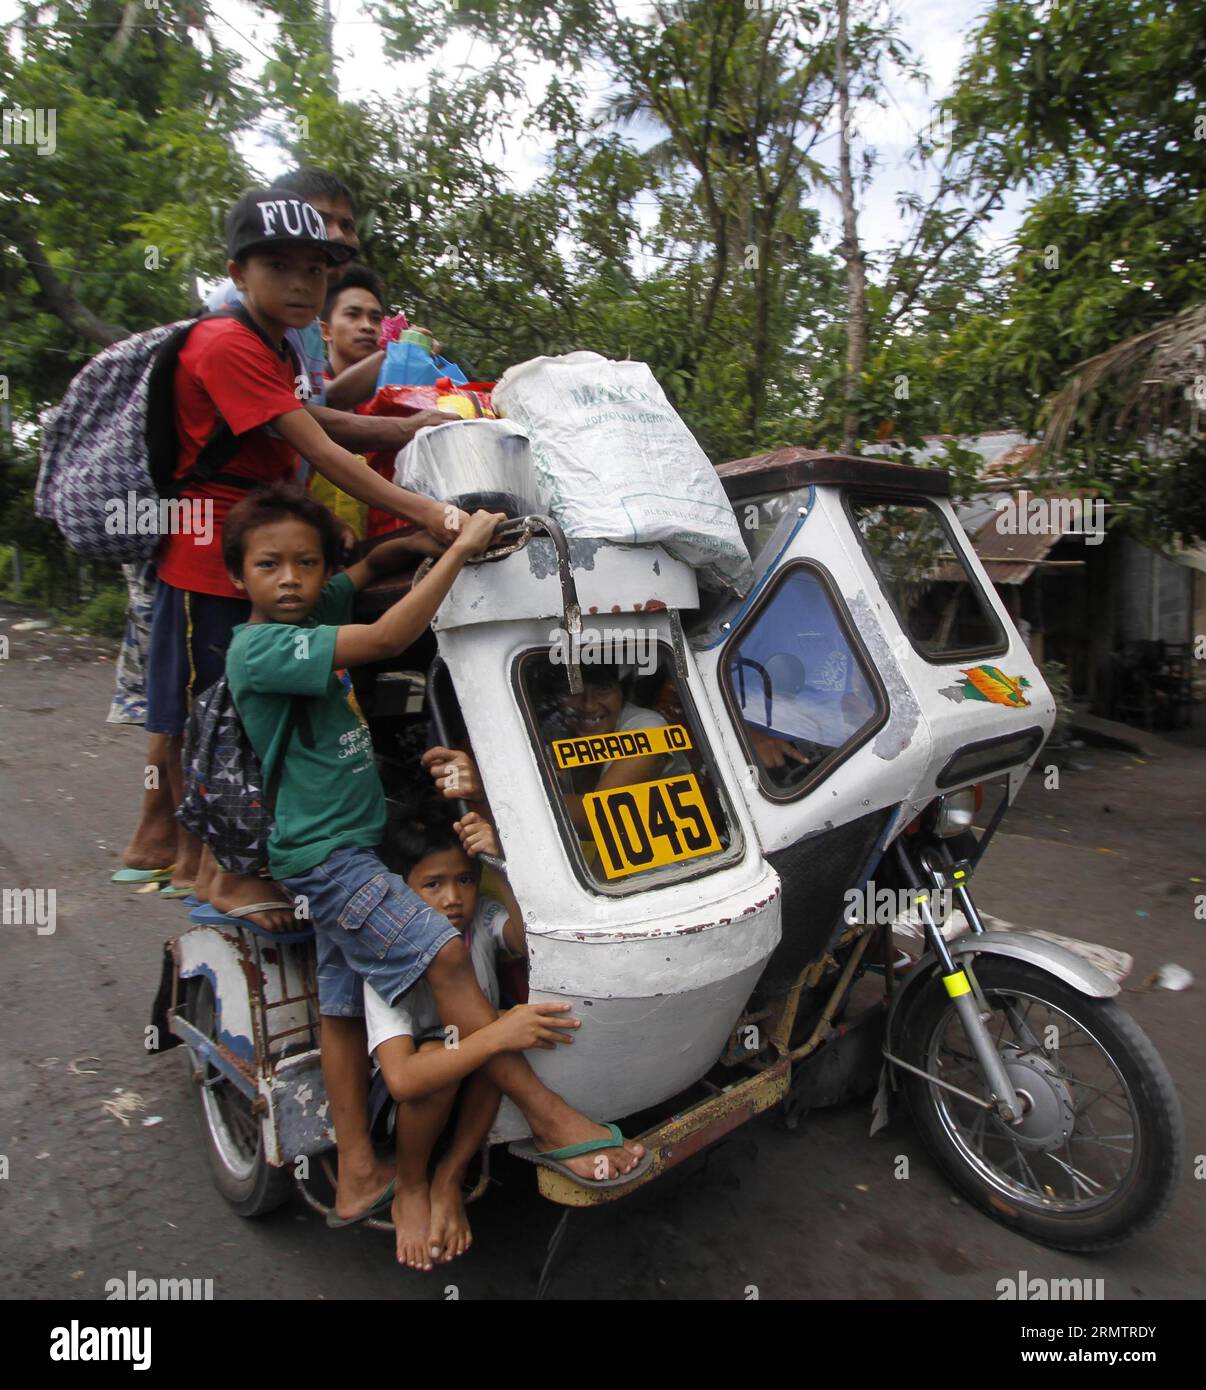 (140917) -- ALBAY, Sept. 17, 2014 -- Residents crowd on a tricycle as they evacuate from the danger zone near the Mayon Volcano in Albay Province, the Philippines, Sept. 17, 2014. The Philippine Institute of Volcanology and Seismology (PHIVOLCS) said Wednesday that Mayon Volcano in the eastern Philippine province of Albay has exhibited intense activity based on its 24-hour observation. The Philippine military said that more than 2,000 families or 10,000 individuals from five municipalities near the volcano have already been transferred to various evacuation centers. ) (zjy) PHILIPPINES-ALBAY-V Stock Photo